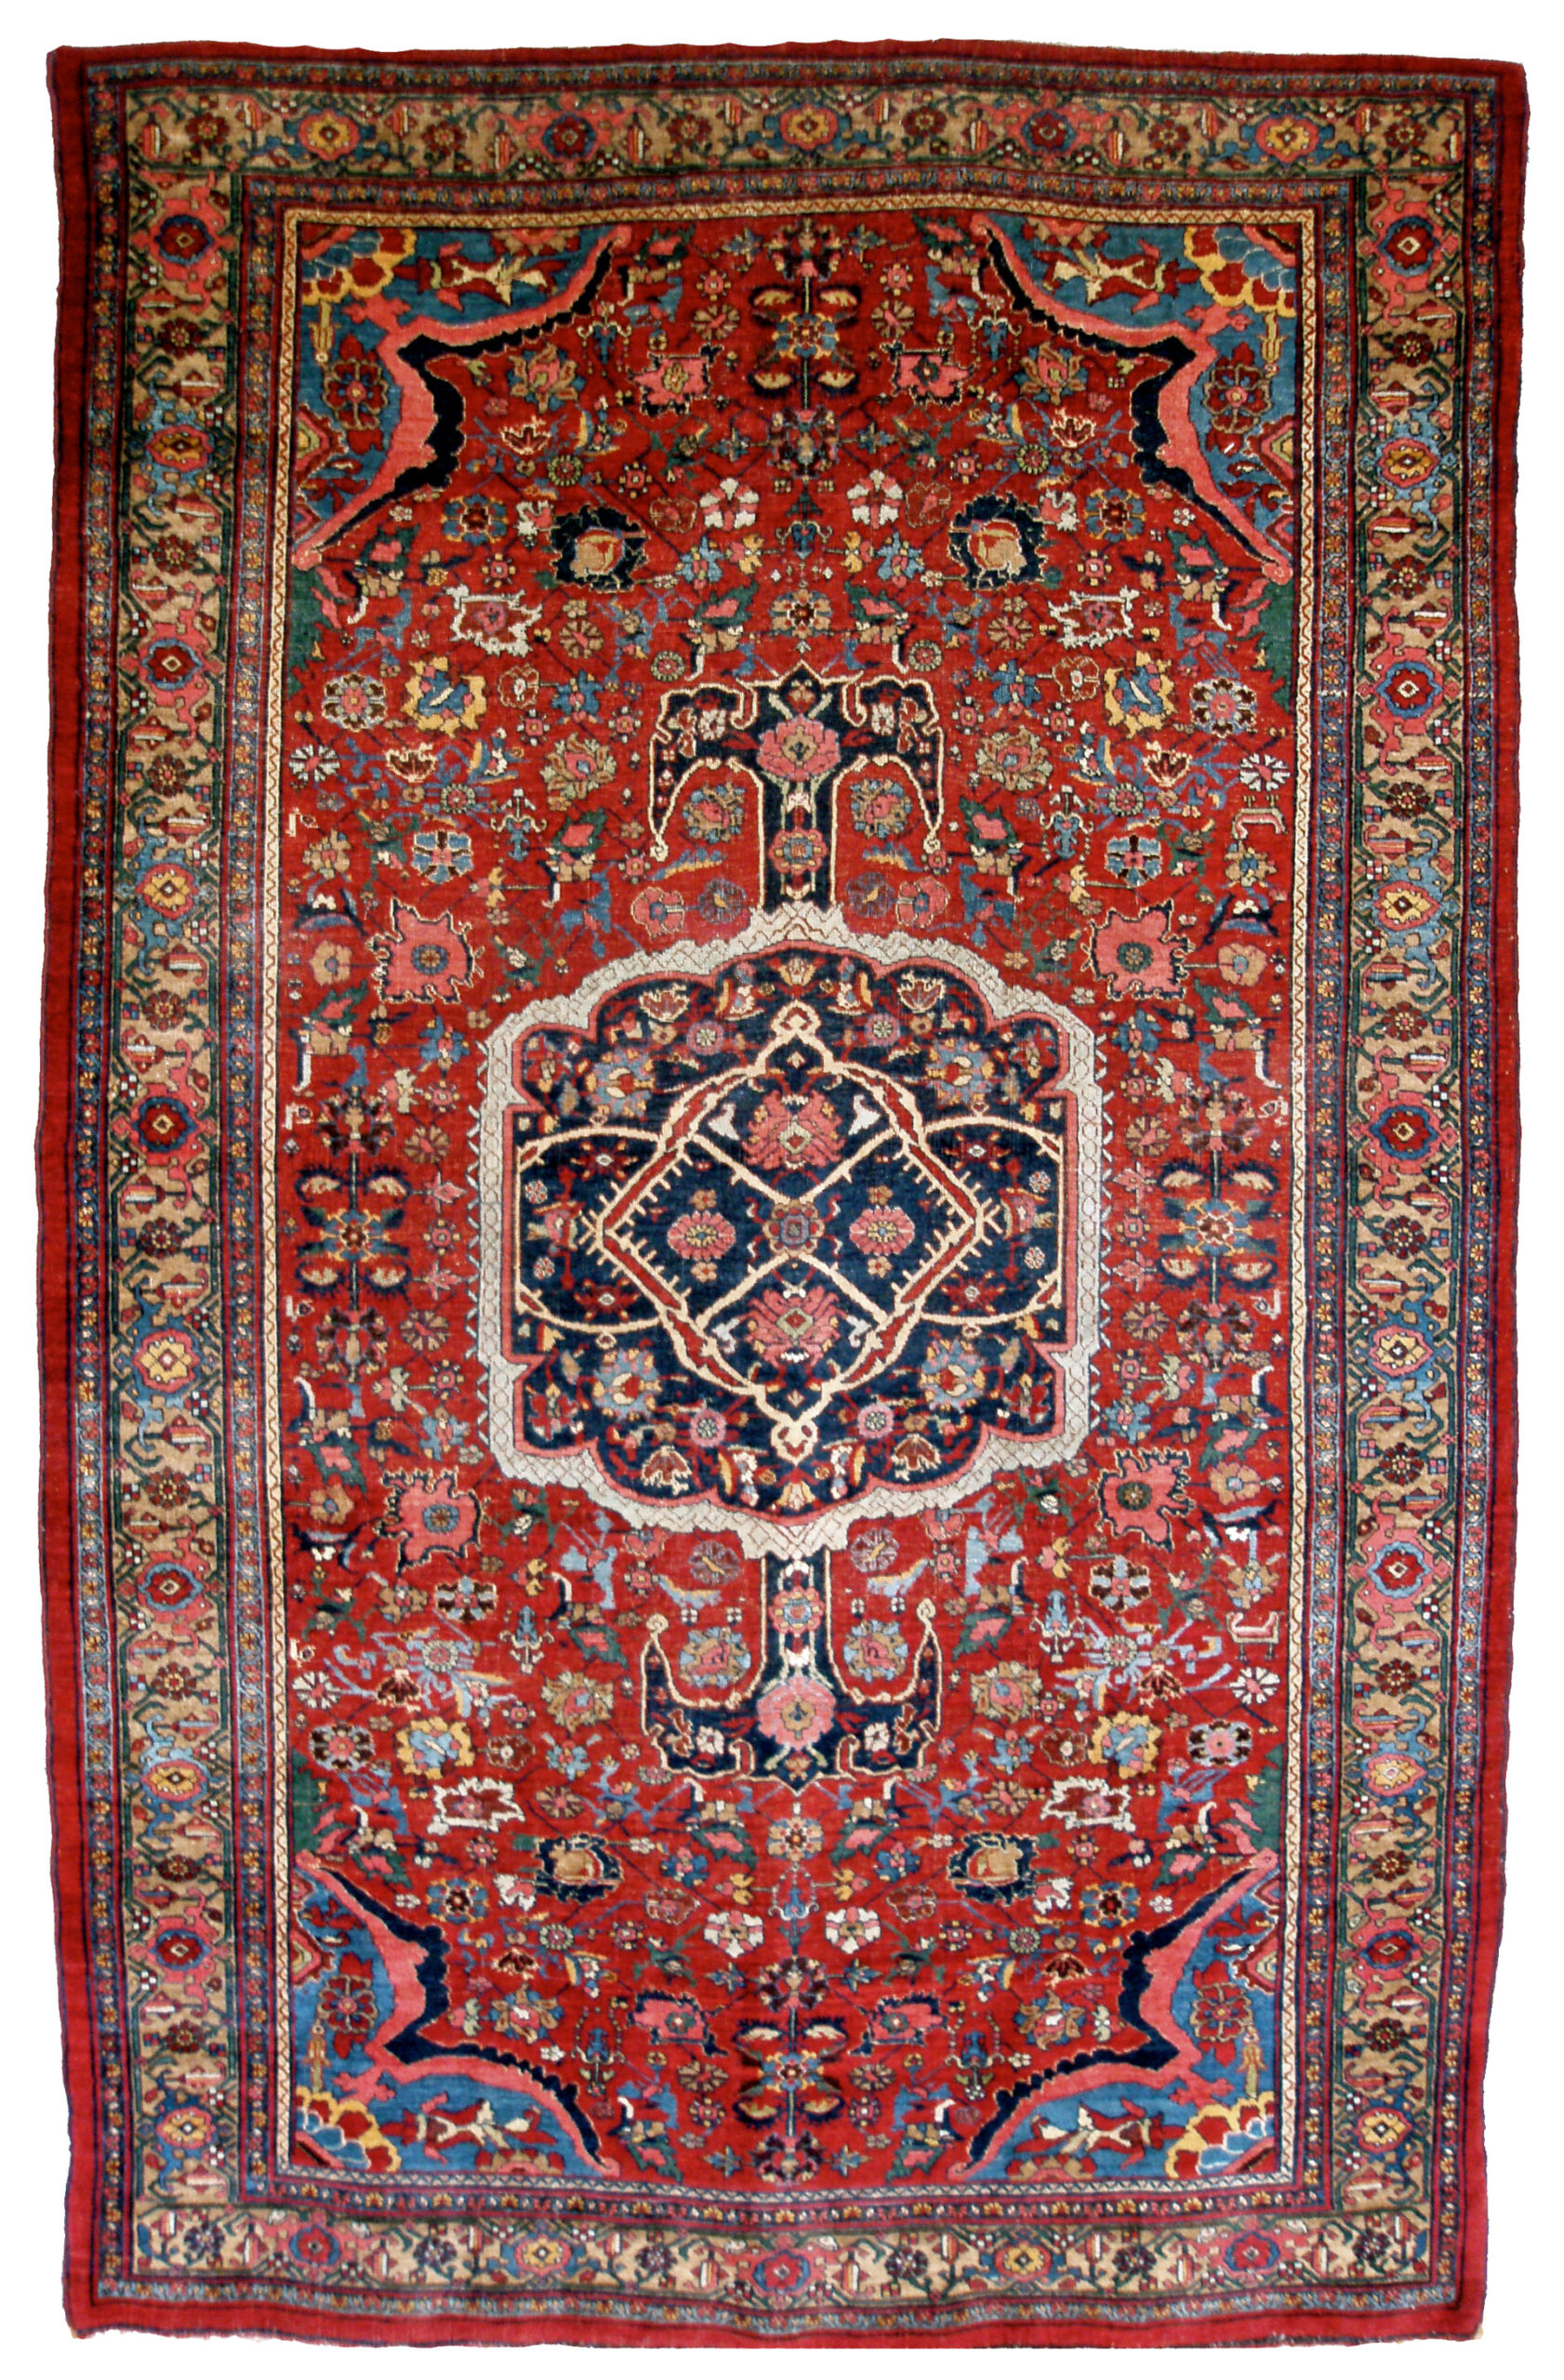 A 19th century northwest Persian Bidjar rug with a navy medallion on a red, floral design field